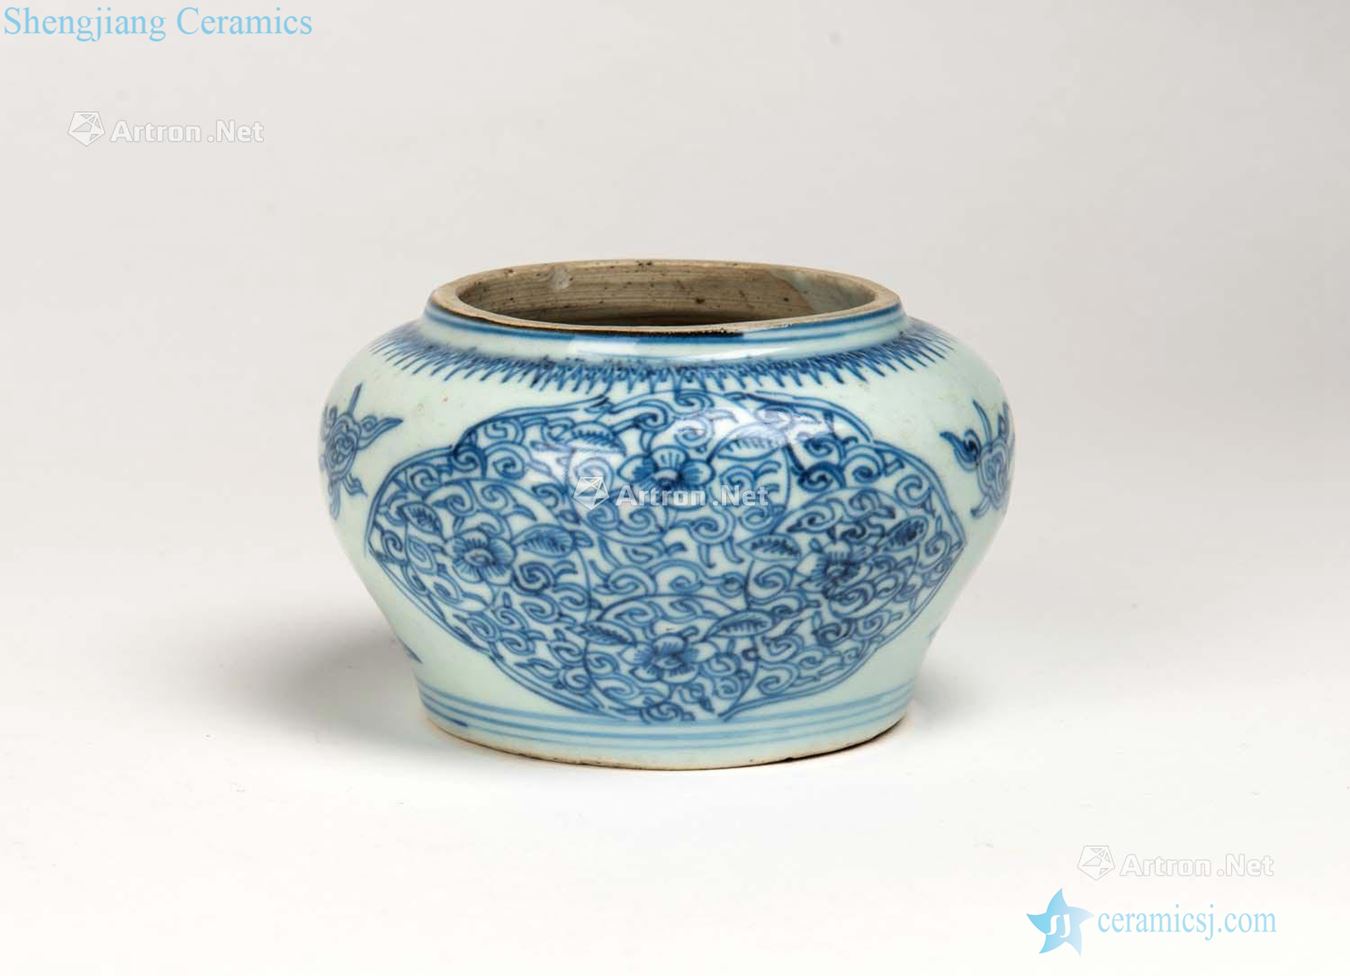 Qing porcelain jar in the 19th century